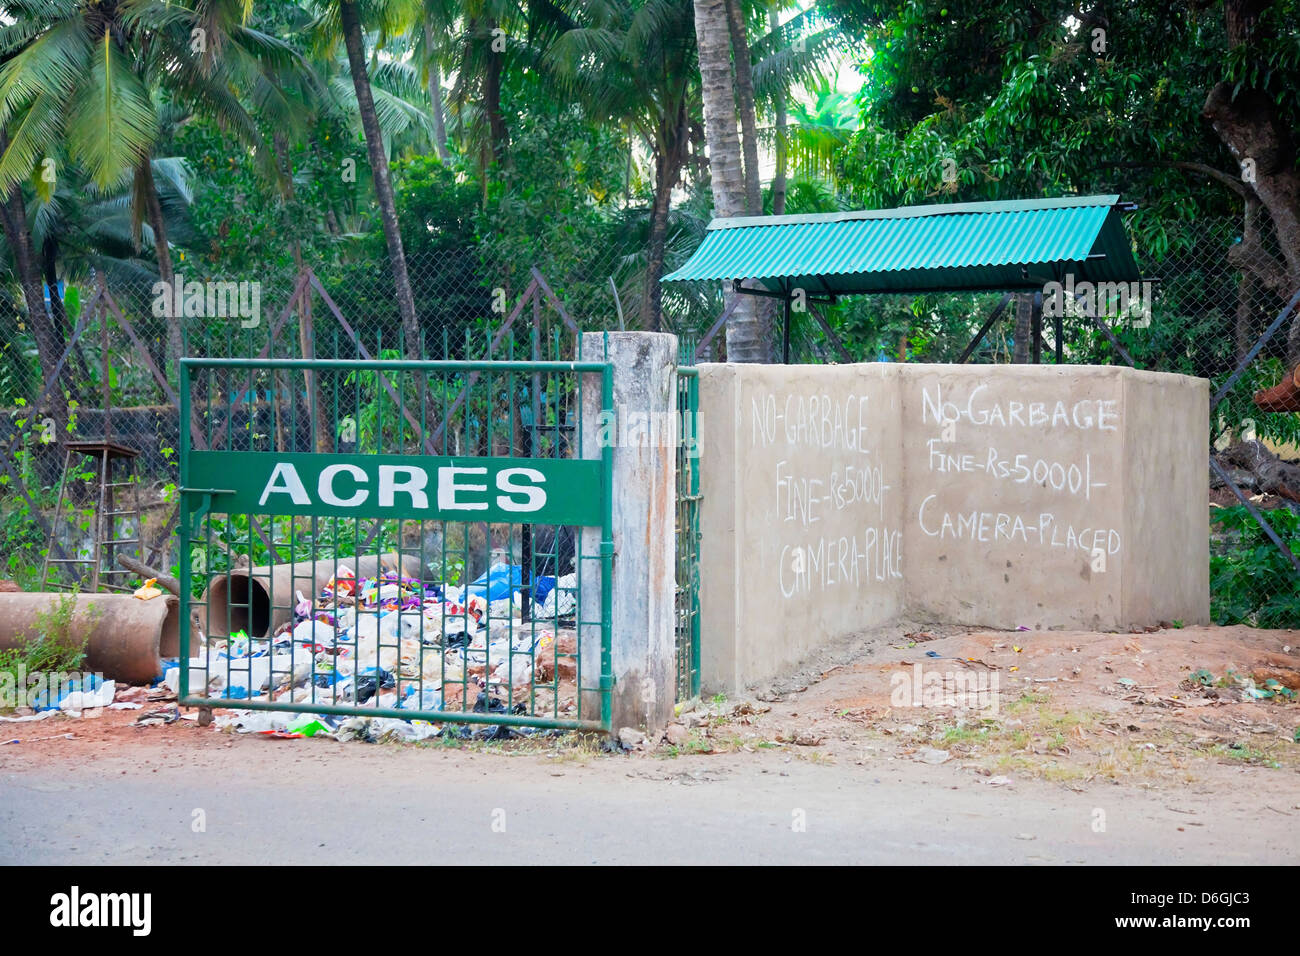 Horizontal landscape of a scene in Goa, India. Typifies a cultural attitude towards littering in urban and rural areas. Stock Photo